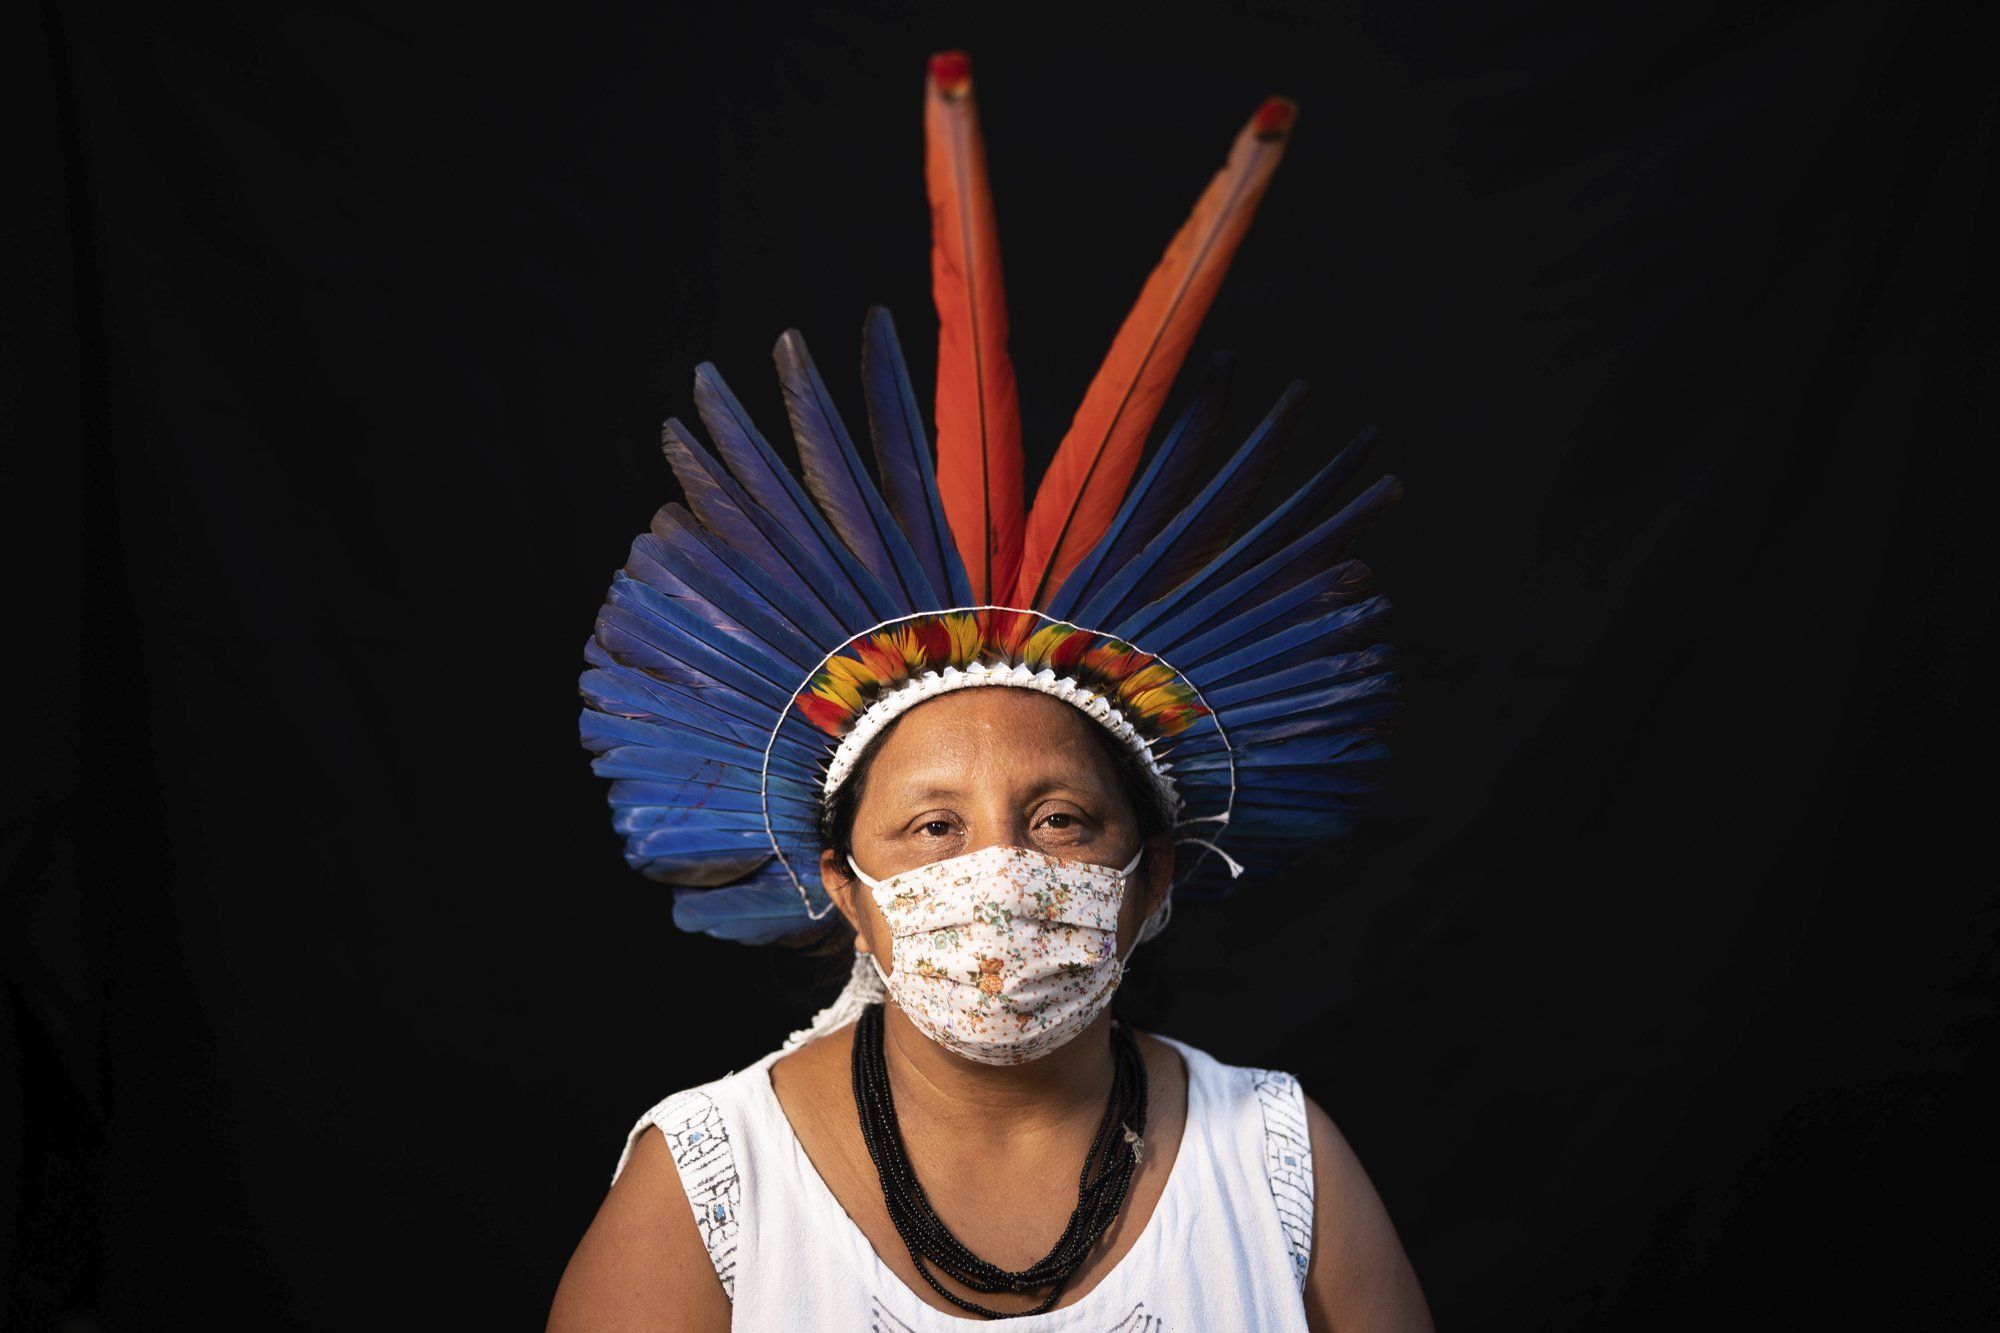 Sonia Vilacio, 46, of the Sateré Mawé indigenous ethnic group, poses for a portrait wearing the traditional dress of her tribe and a face mask amid the spread of the new coronavirus in Manaus, Brazil, Wednesday, May 27, 2020. The new coronavirus has hit Sônia Vilacio twice: when tourists disappeared from Manaus and she was left without an income from selling arts and crafts, and soon after when she fell ill with a fever, shortness of breath, and a cough, telltale signs of COVID-19. Image by Felipe Dana / AP Photo. Brazil, 2020.